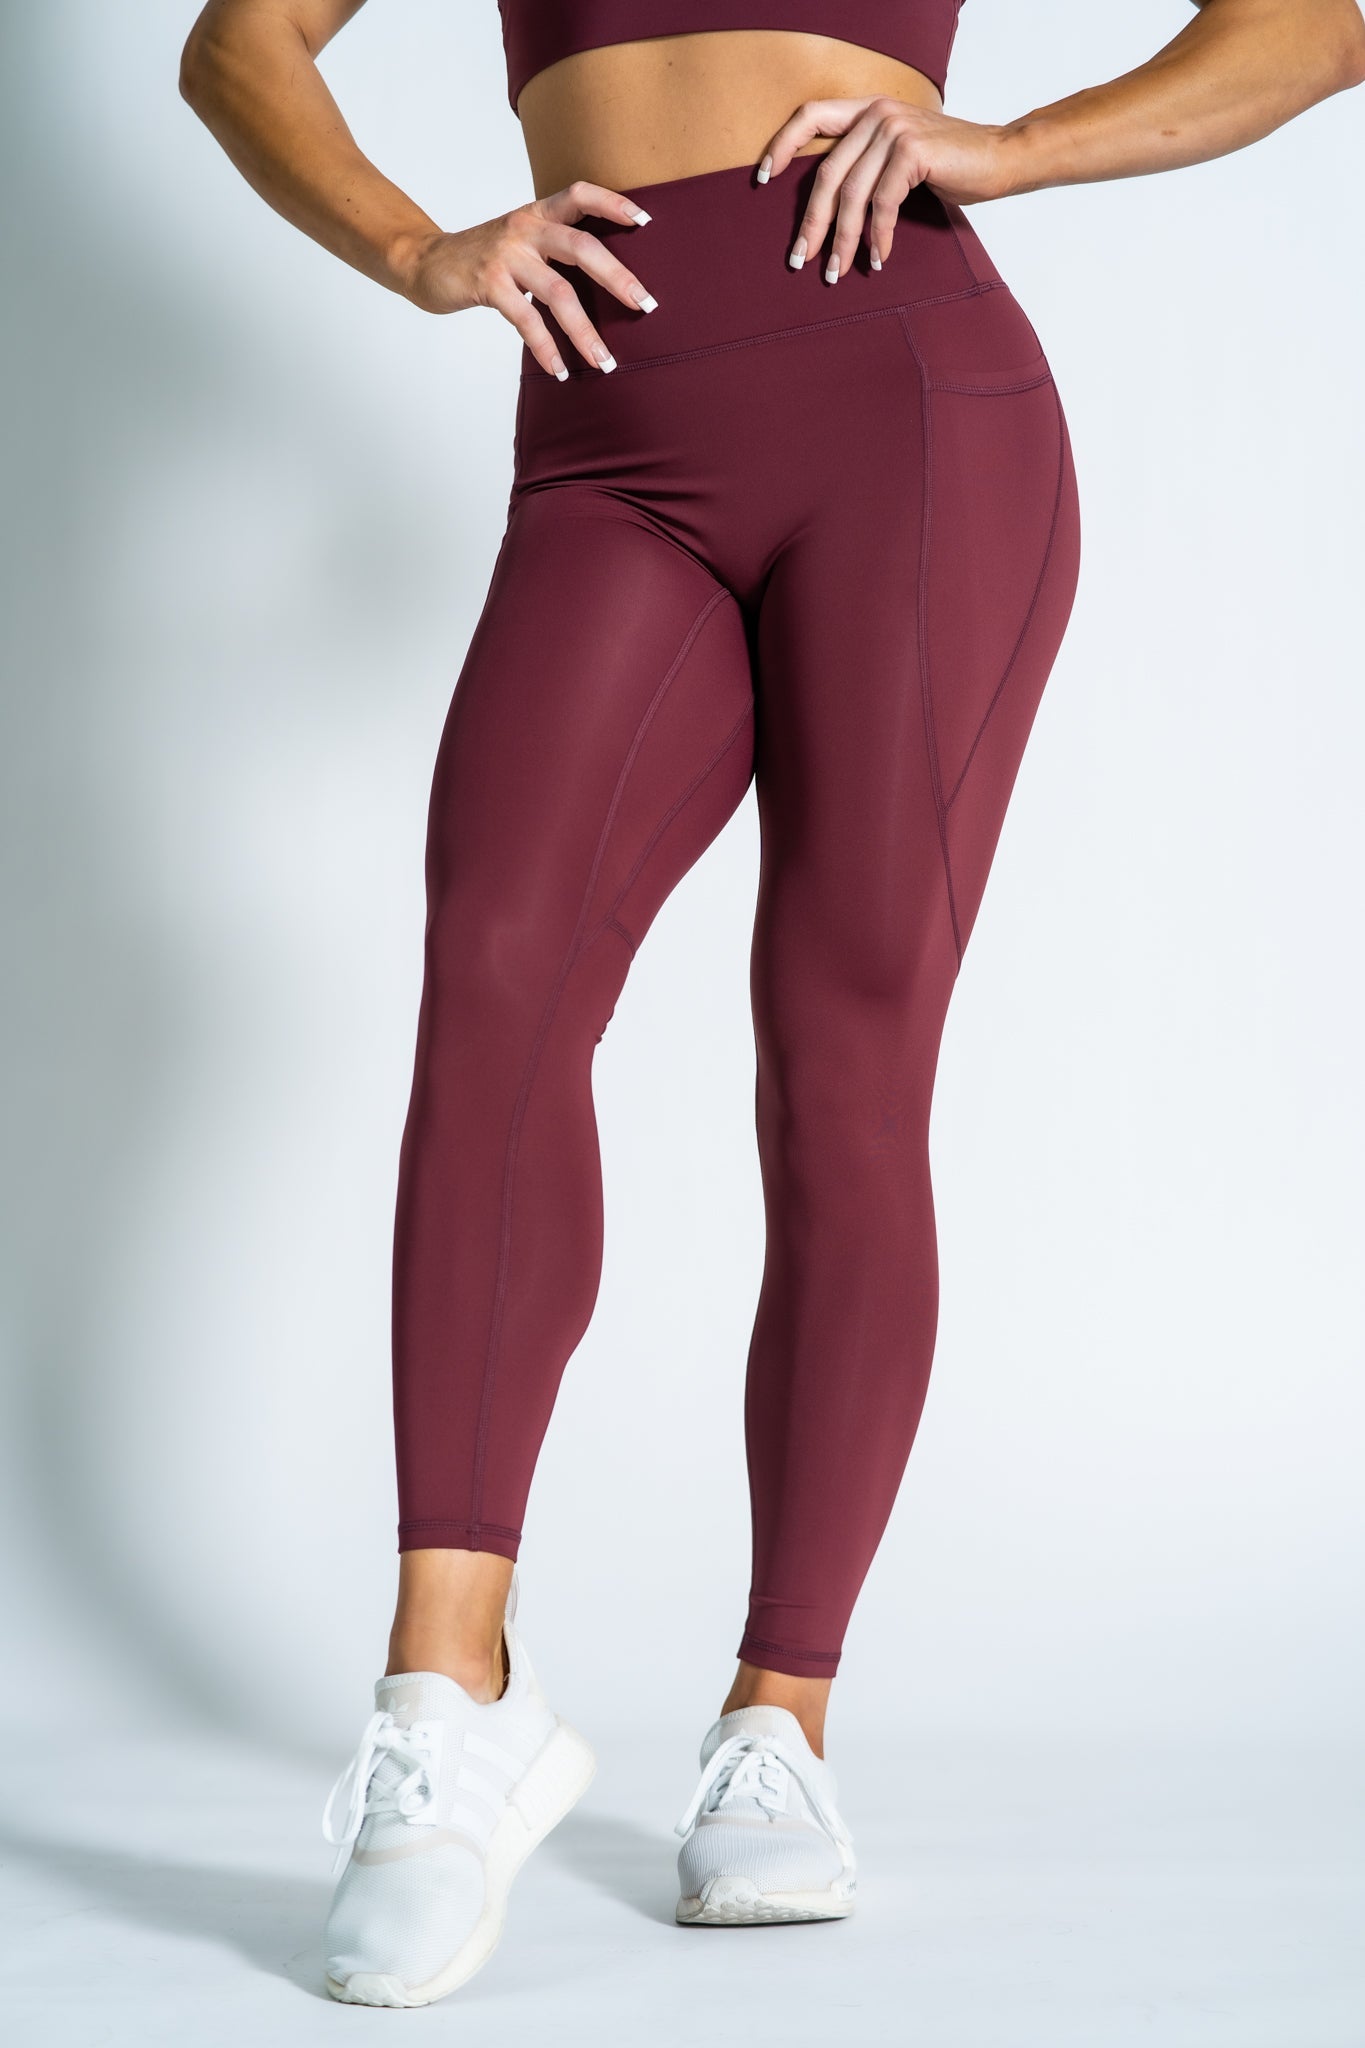 Stretch Fit Yoga Pants for Women's & Tights for Women Workout with Mesh  Insert & Side Pockets at Rs 190 in Surat